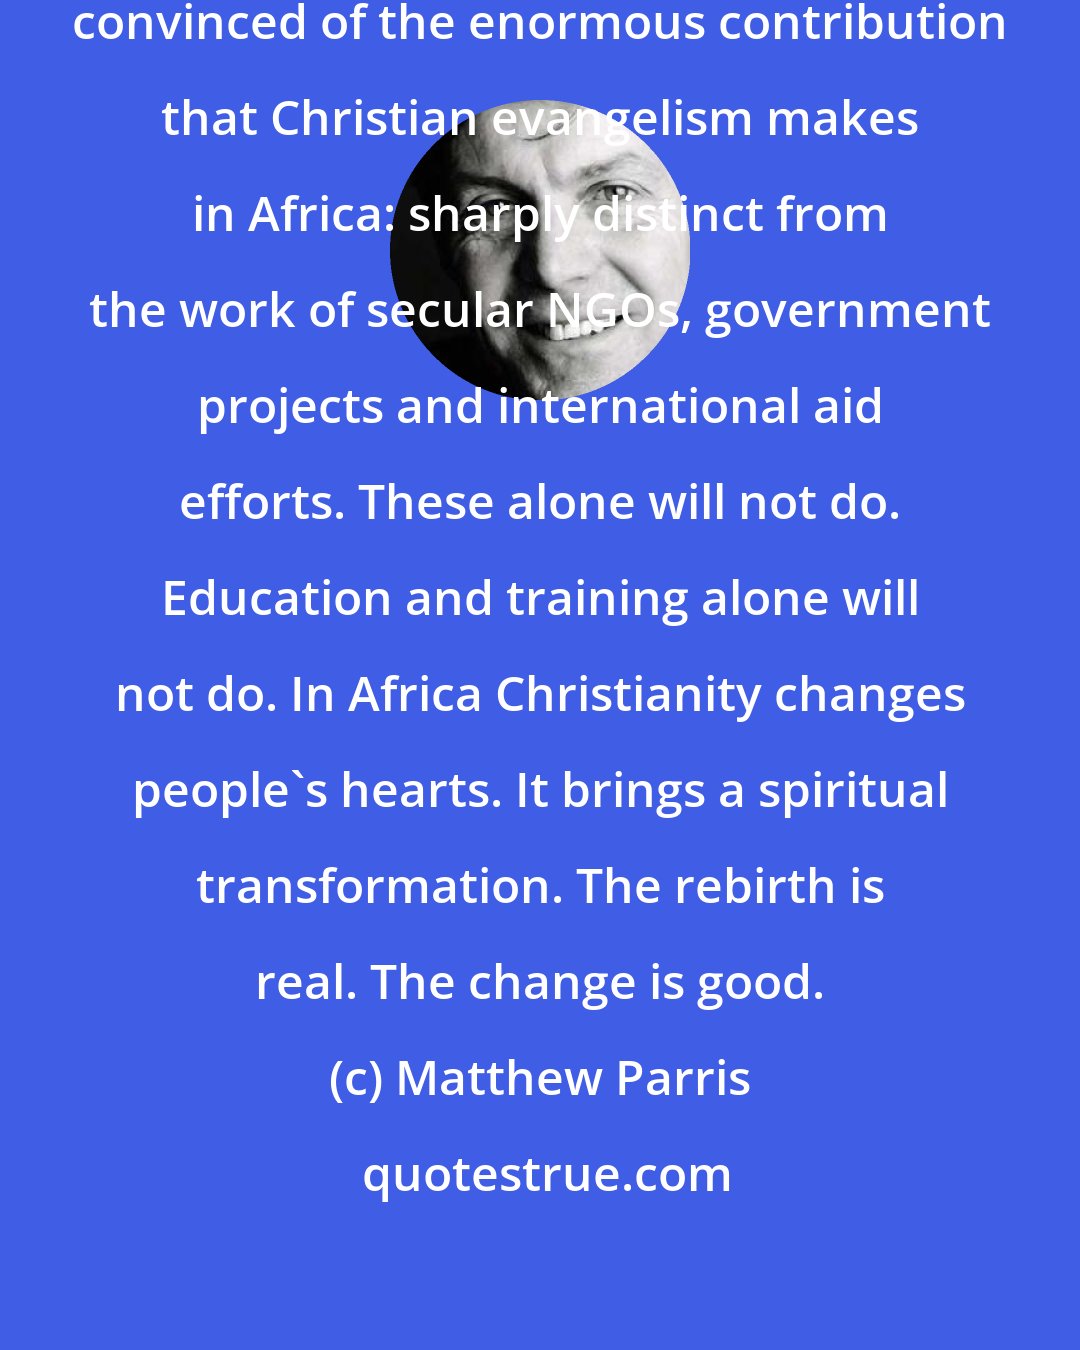 Matthew Parris: Now a confirmed atheist, I've become convinced of the enormous contribution that Christian evangelism makes in Africa: sharply distinct from the work of secular NGOs, government projects and international aid efforts. These alone will not do. Education and training alone will not do. In Africa Christianity changes people's hearts. It brings a spiritual transformation. The rebirth is real. The change is good.